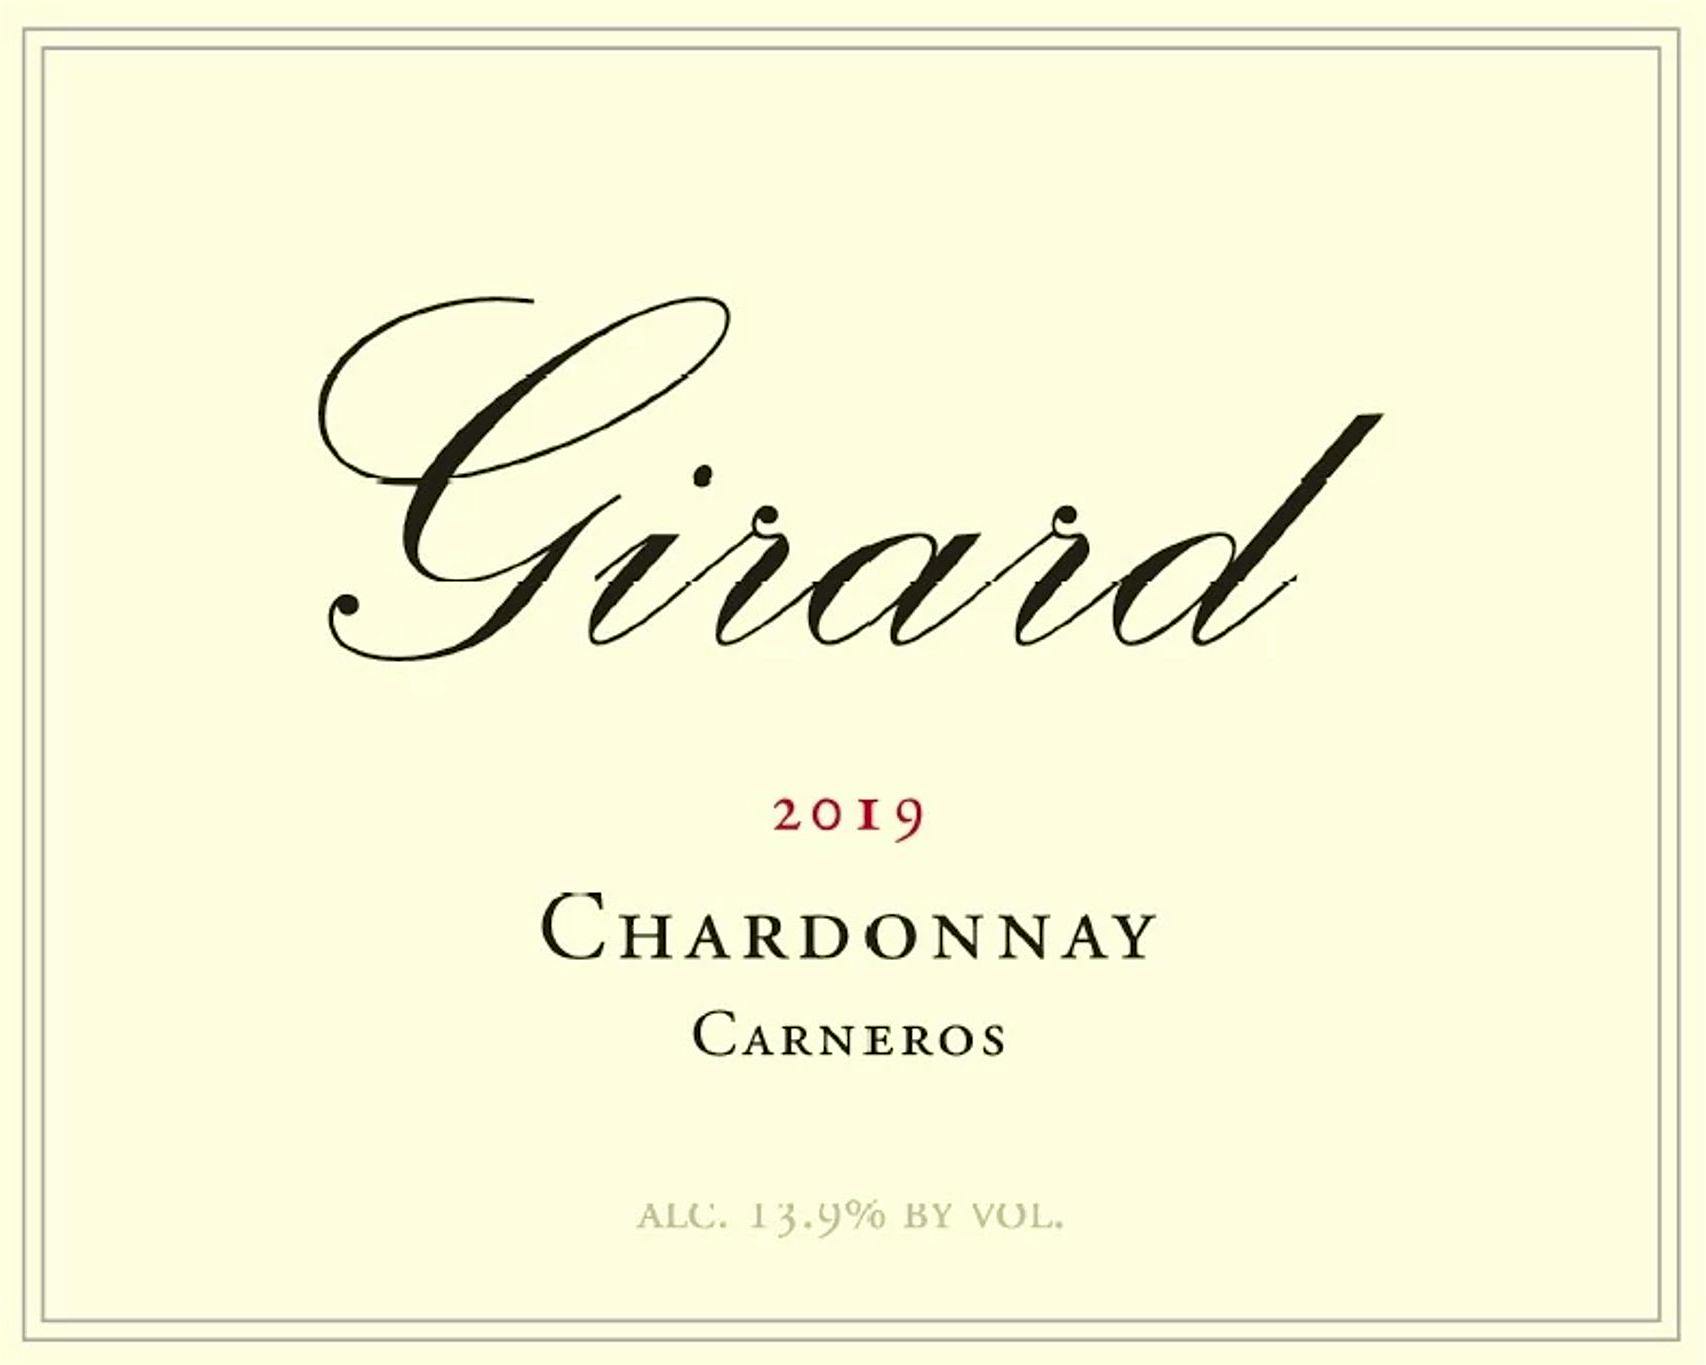 Label for Girard